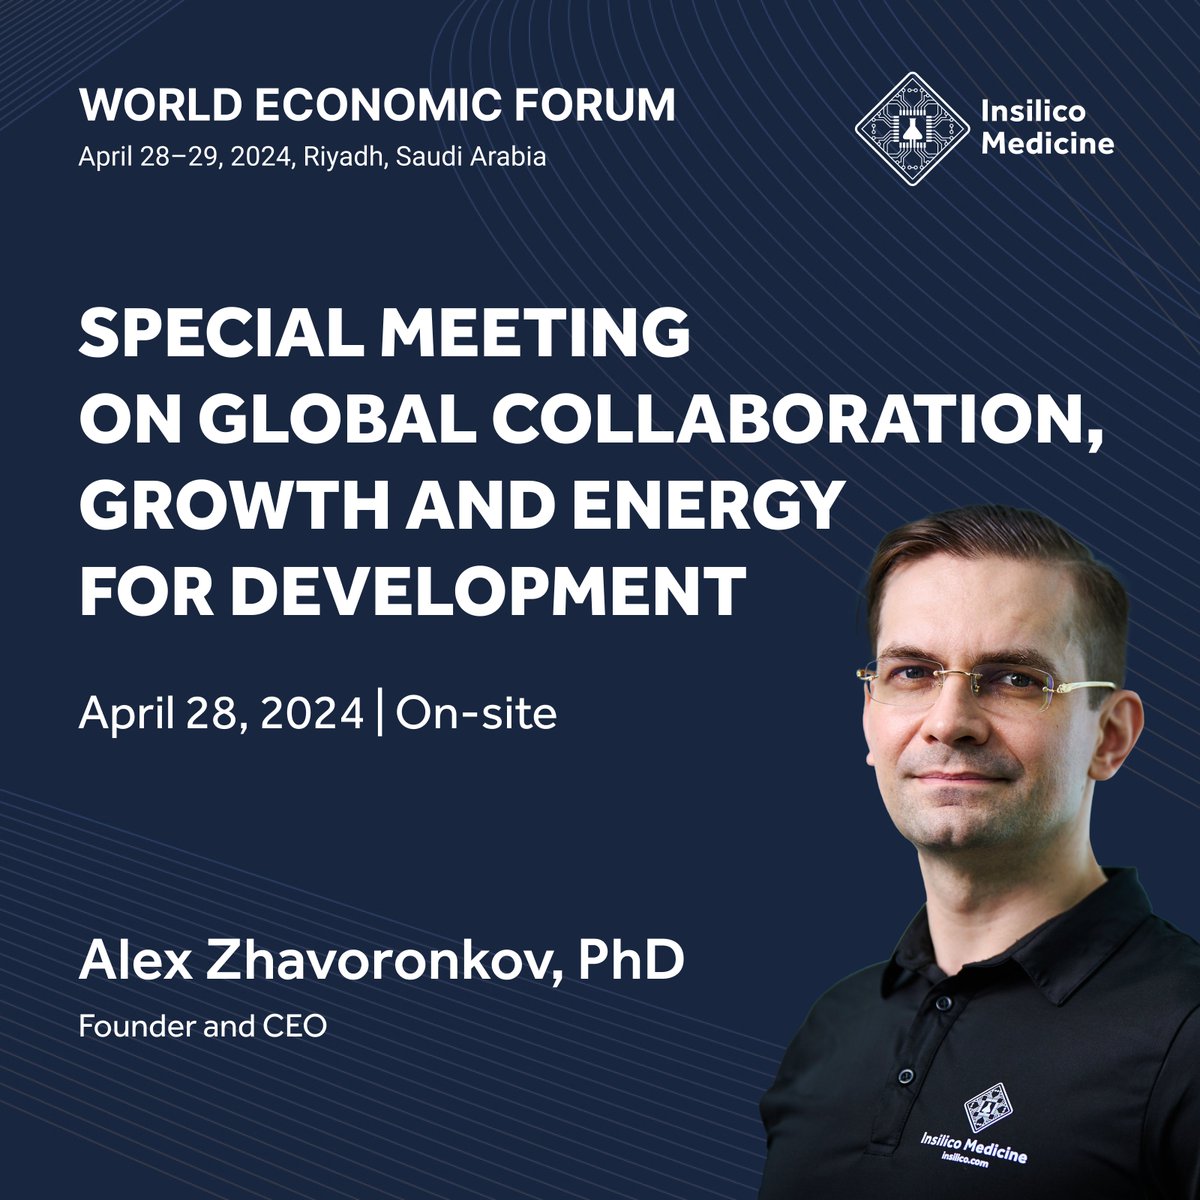 Connect w/ Insilico founder & CEO @biogerontology at the @wef Special Meeting on Global Collaboration, Growth and Energy for Development in #Riyadh on April 28. The meeting will bring together over 700 leaders to discuss how to address #global challenges & drive #tech advances.